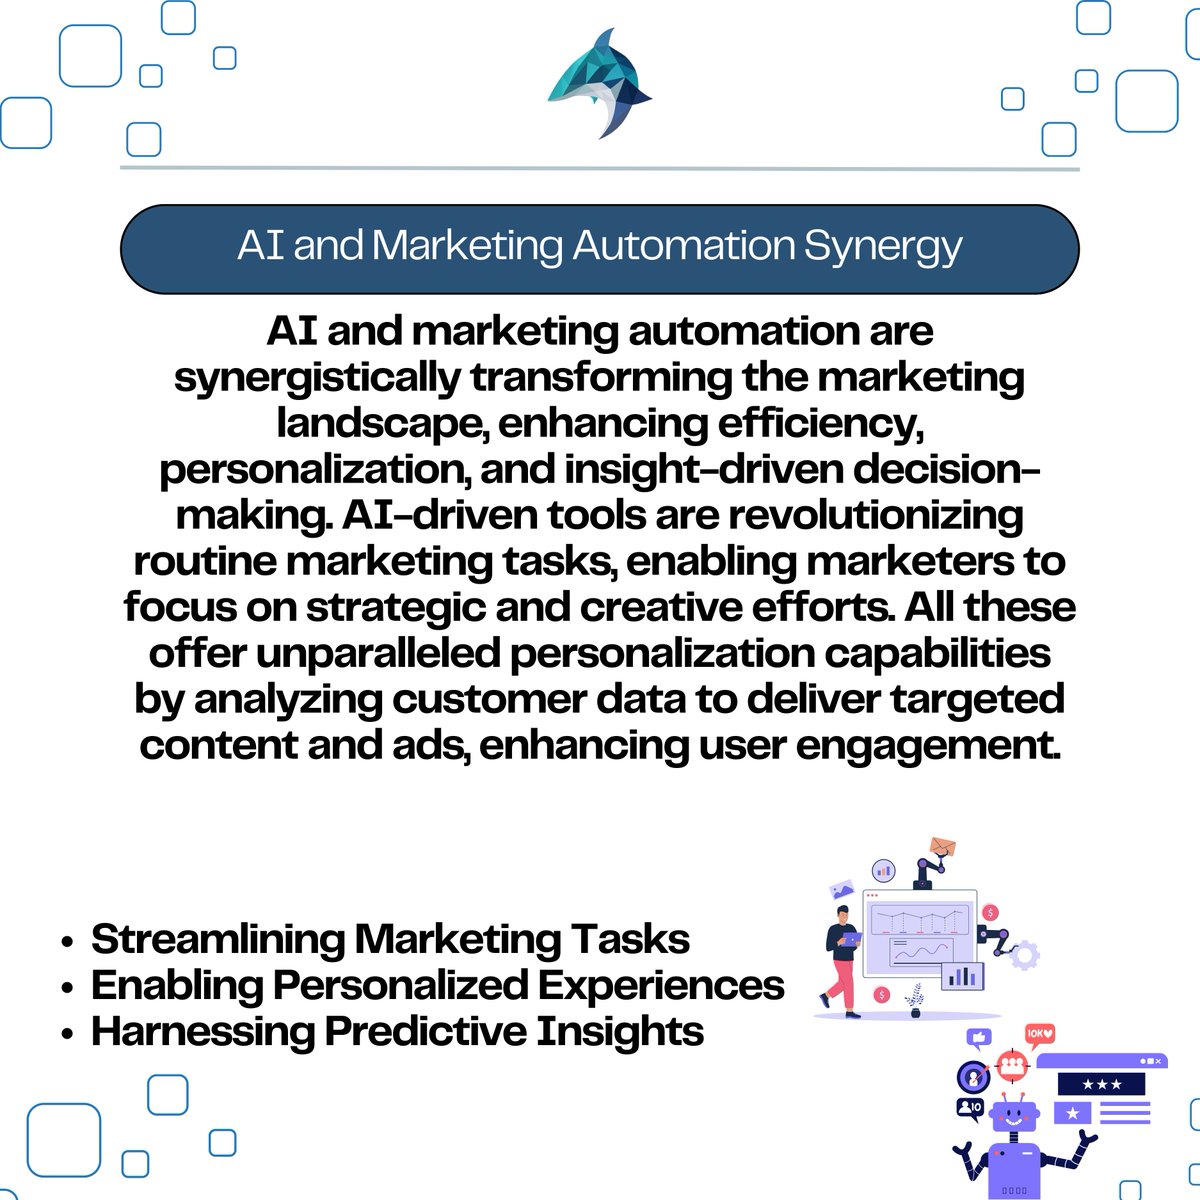 (1/7) 🌟 Thread: Marketing automation and AI are revolutionizing the marketing landscape. Here’s how these technologies are taking marketing to the next level, driving efficiency, personalization, and engagement. #marketingagency #AI